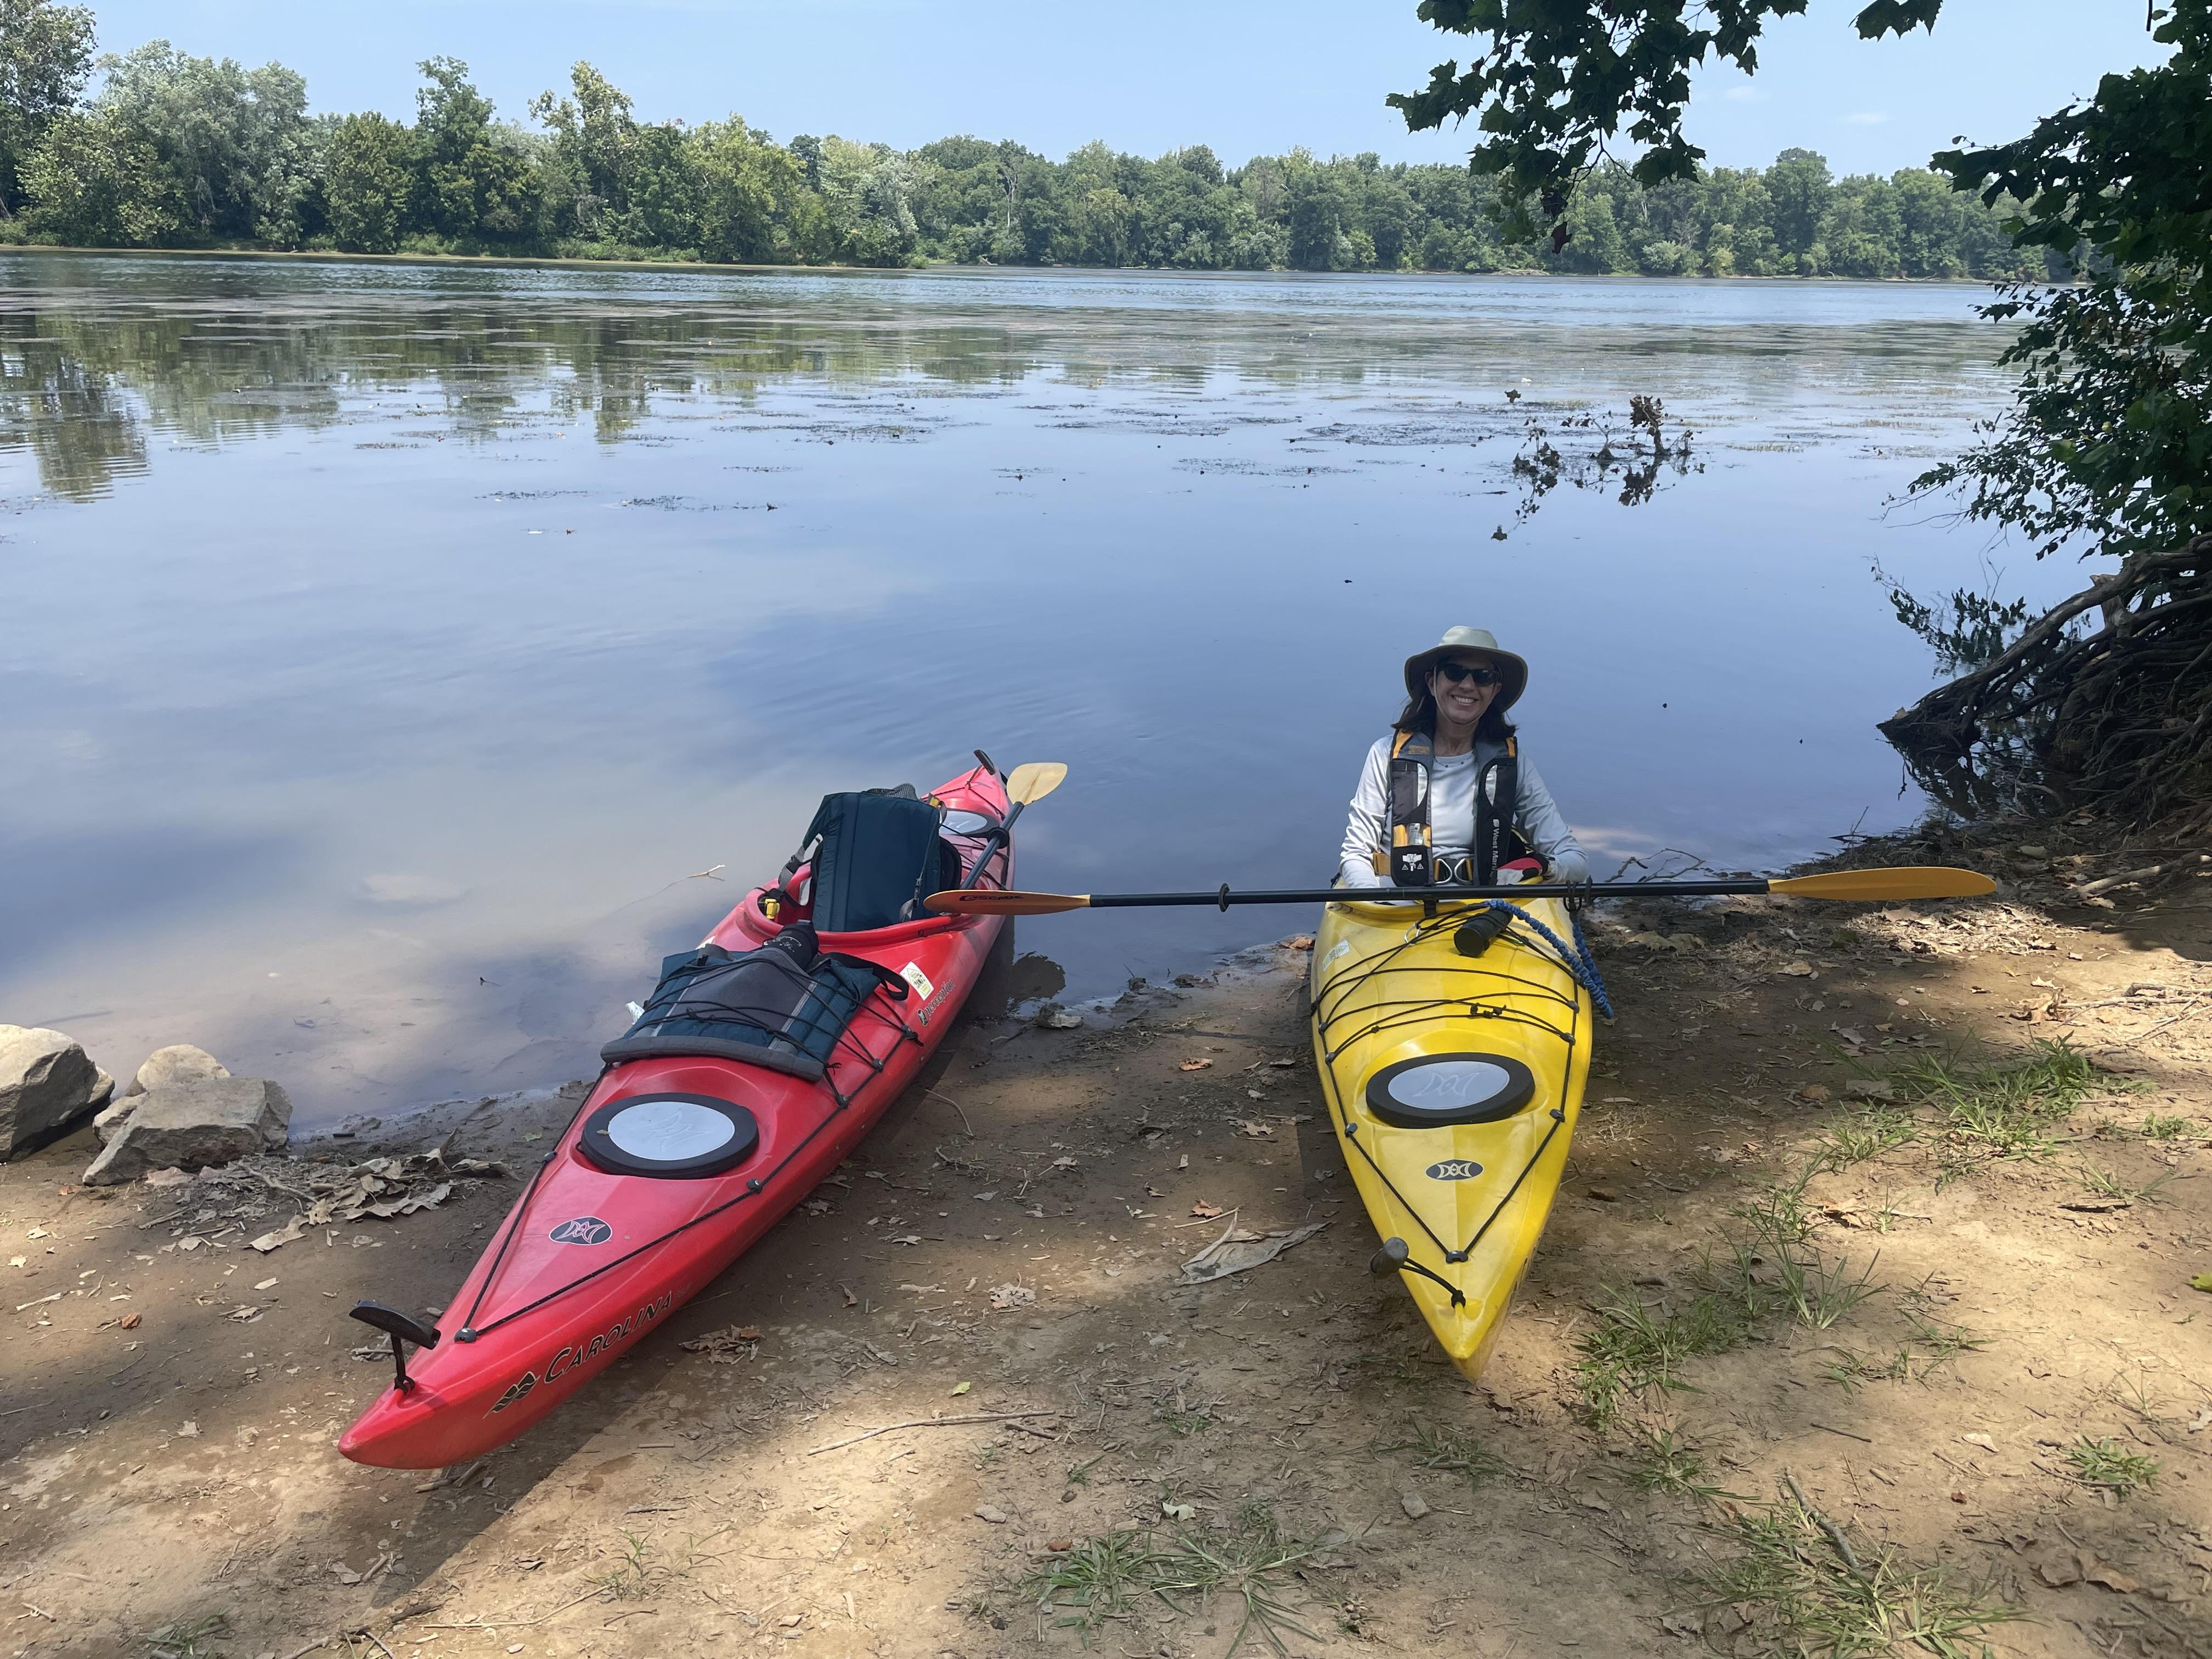 two kayaks on the shore with a person in one of them